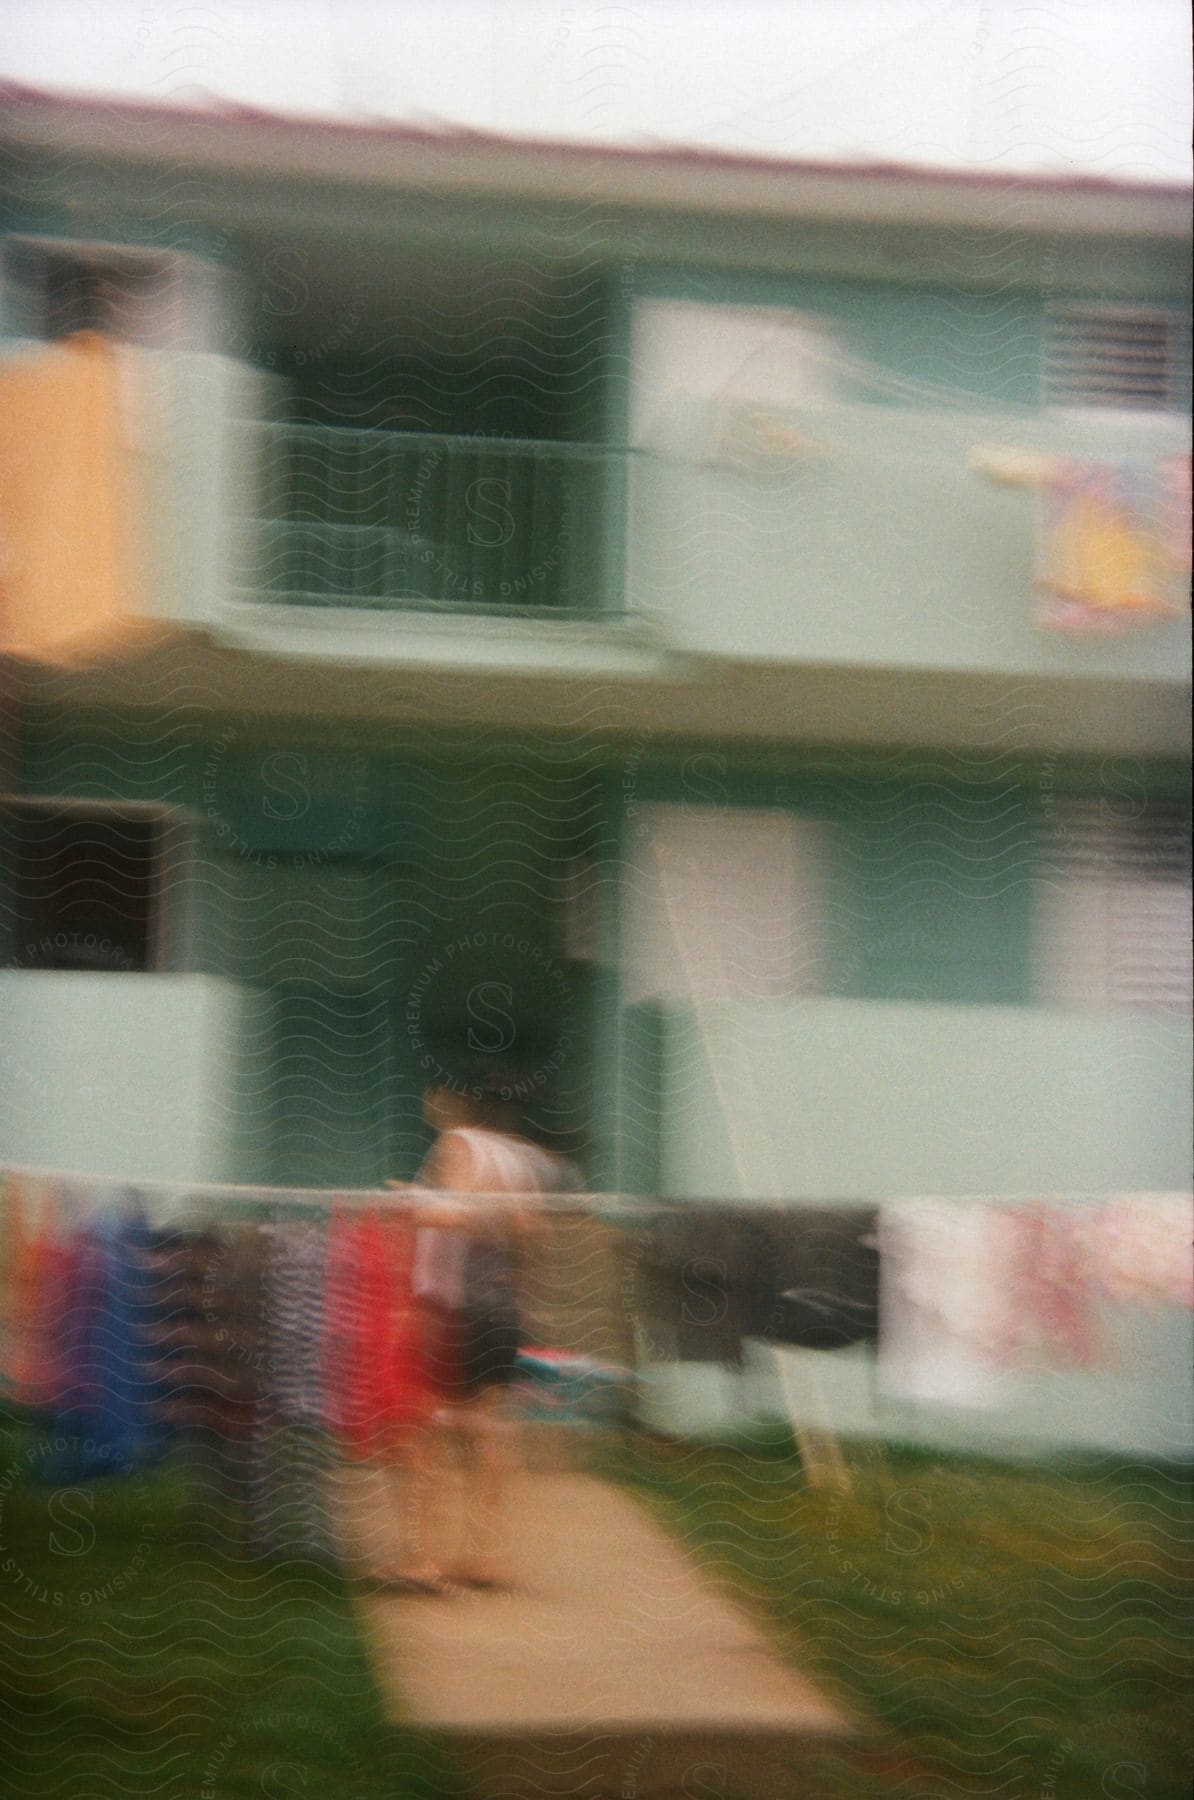 A person standing in the yard of a green house, with clothes hanging on a clothesline.